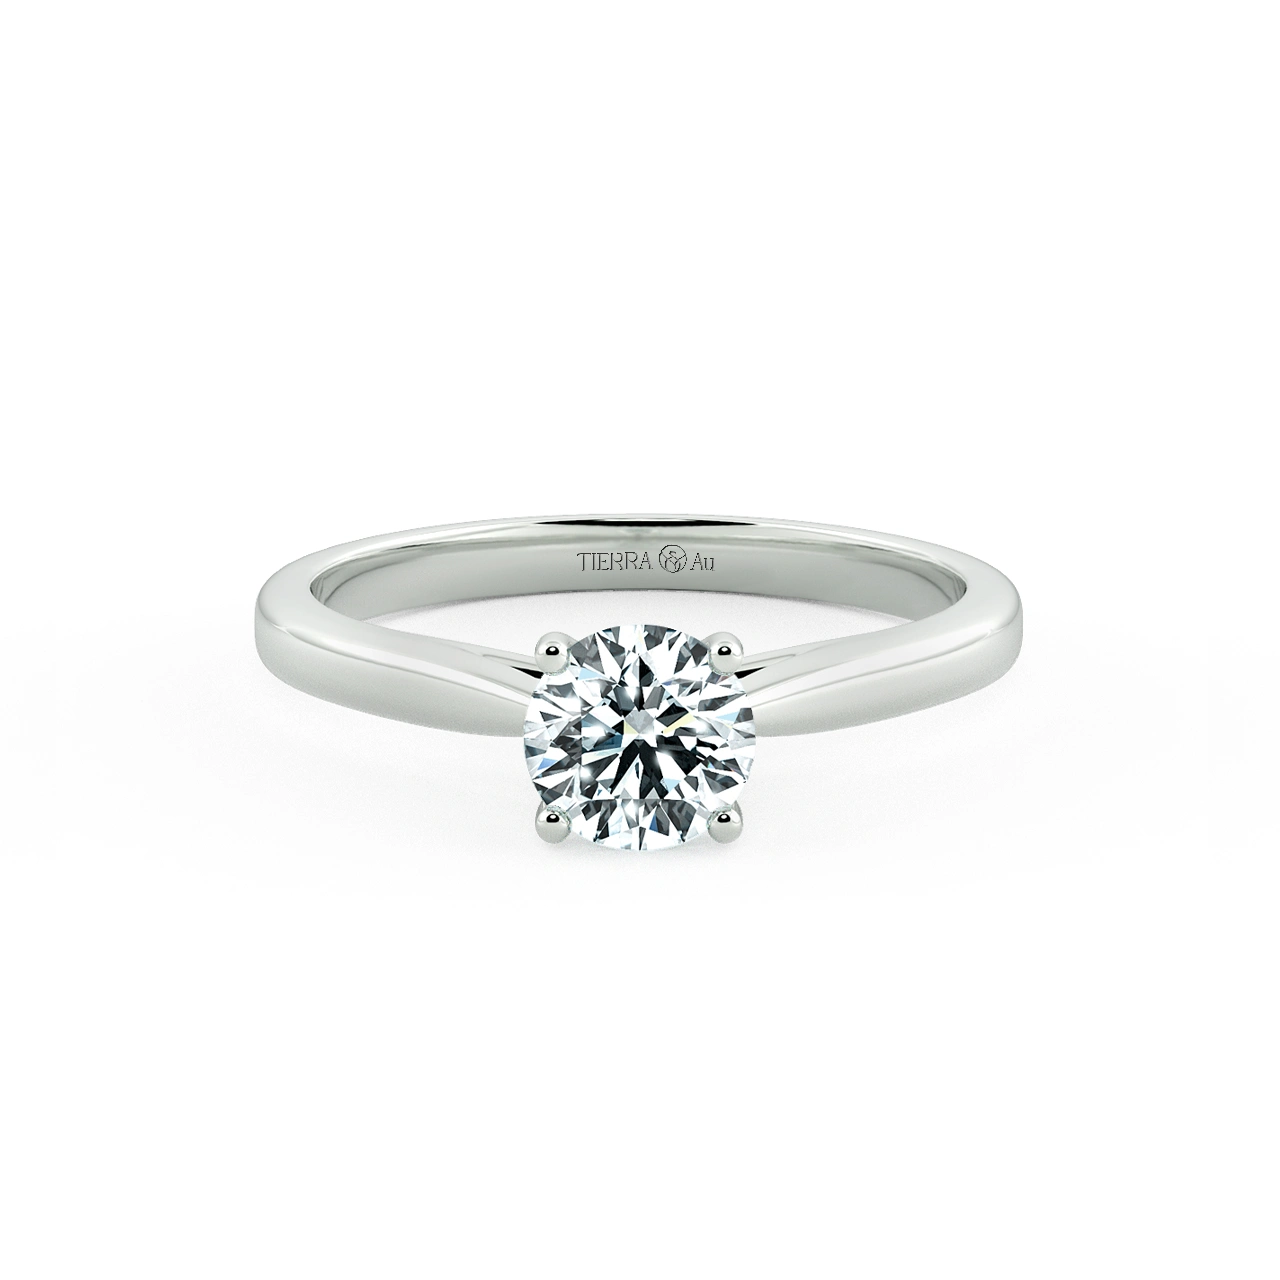 Bridge Accent Engagement Ring with Eternity Band NCH1603